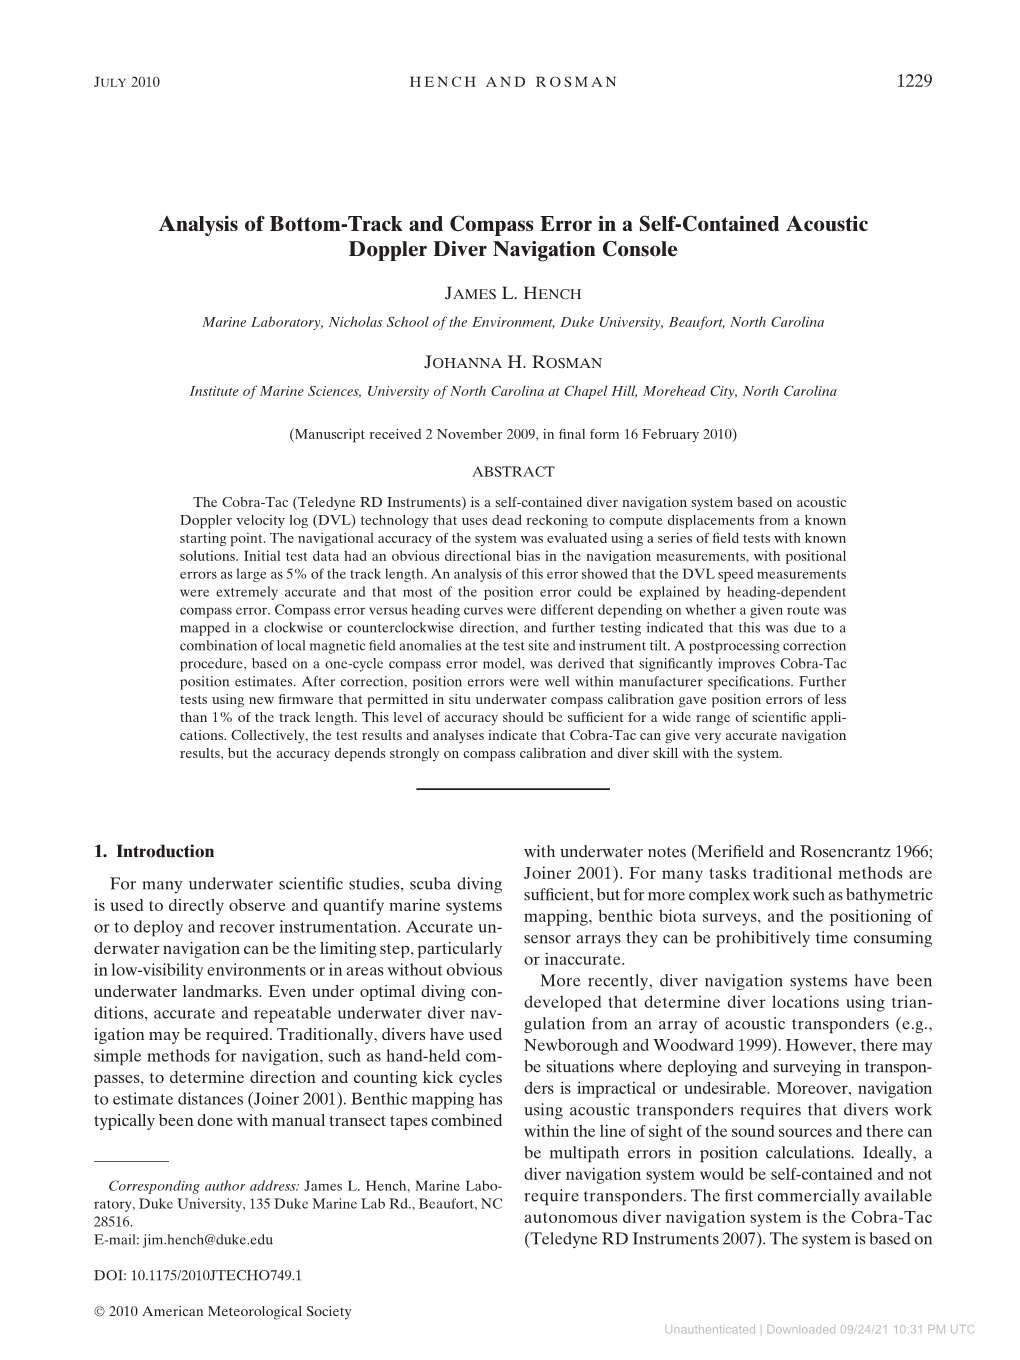 Analysis of Bottom-Track and Compass Error in a Self-Contained Acoustic Doppler Diver Navigation Console